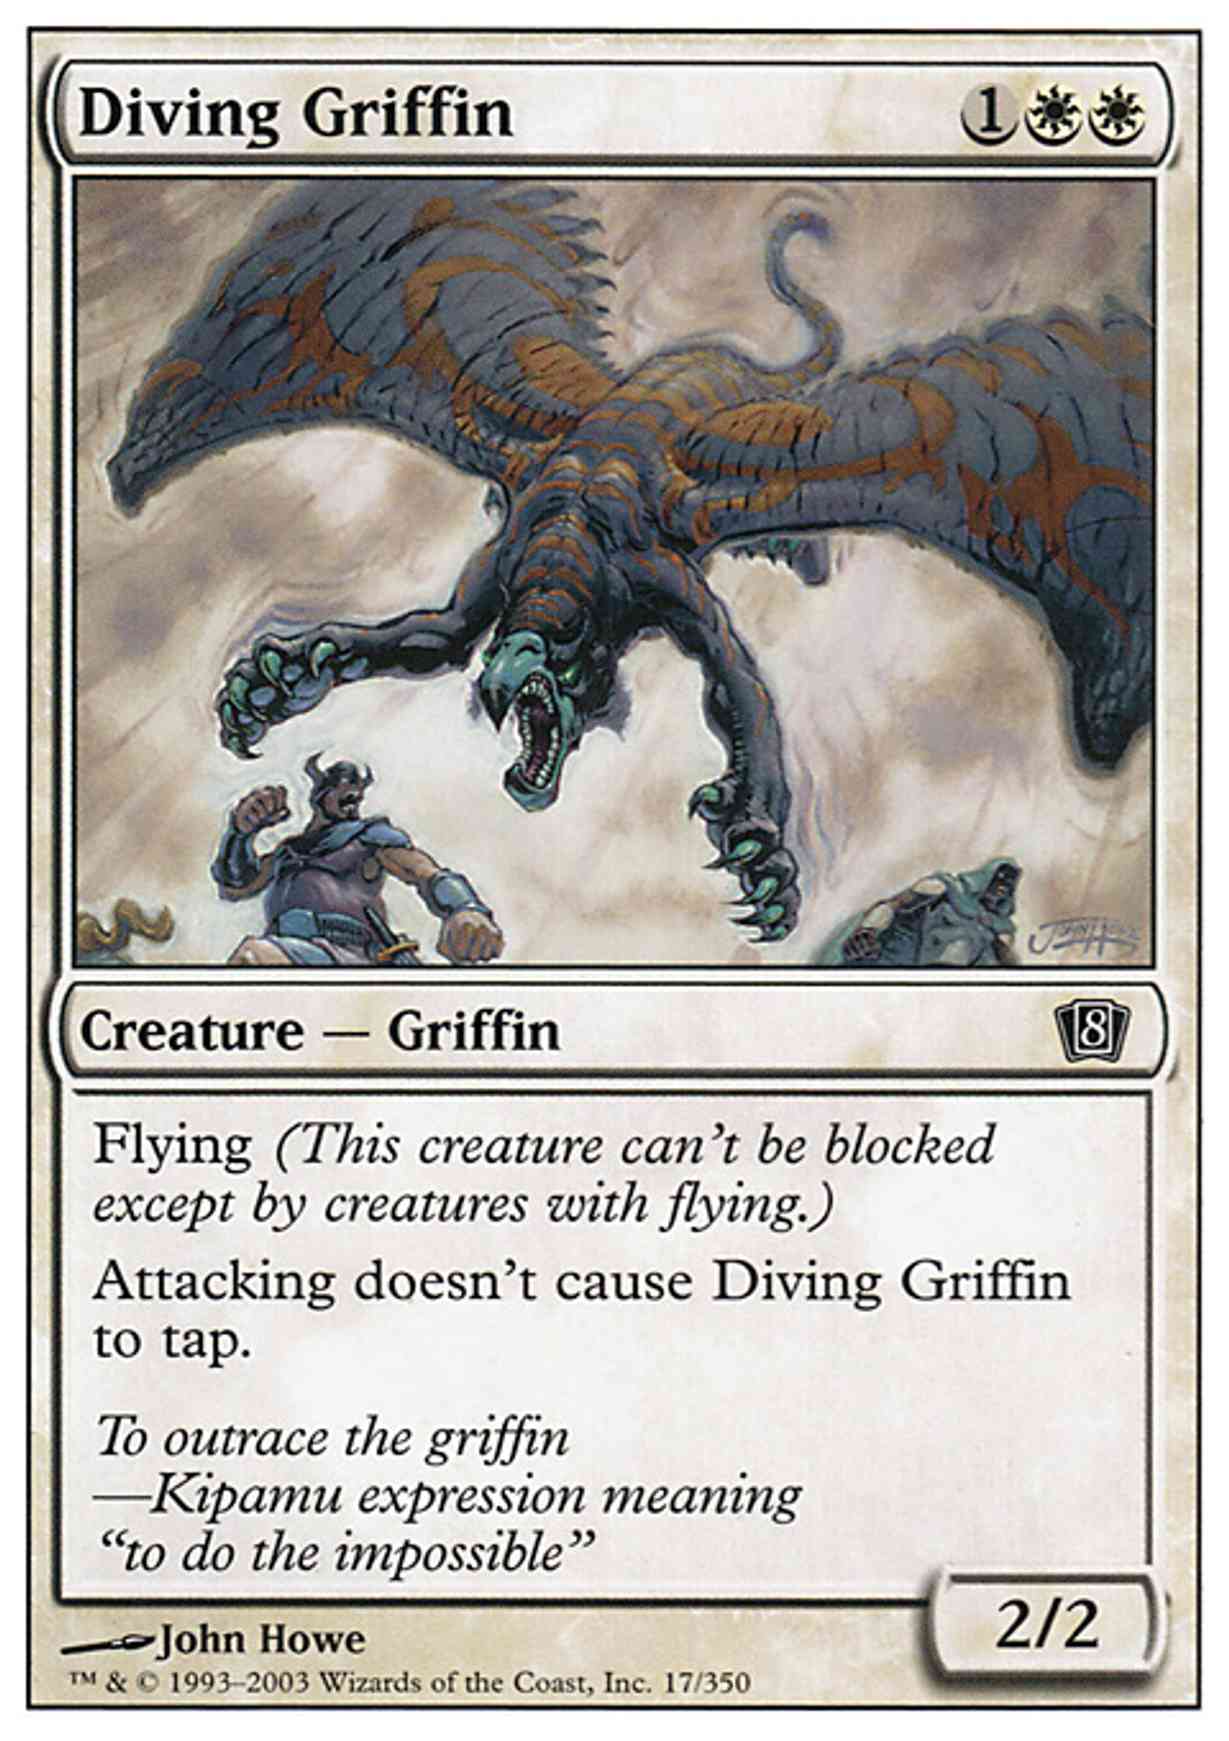 Diving Griffin magic card front